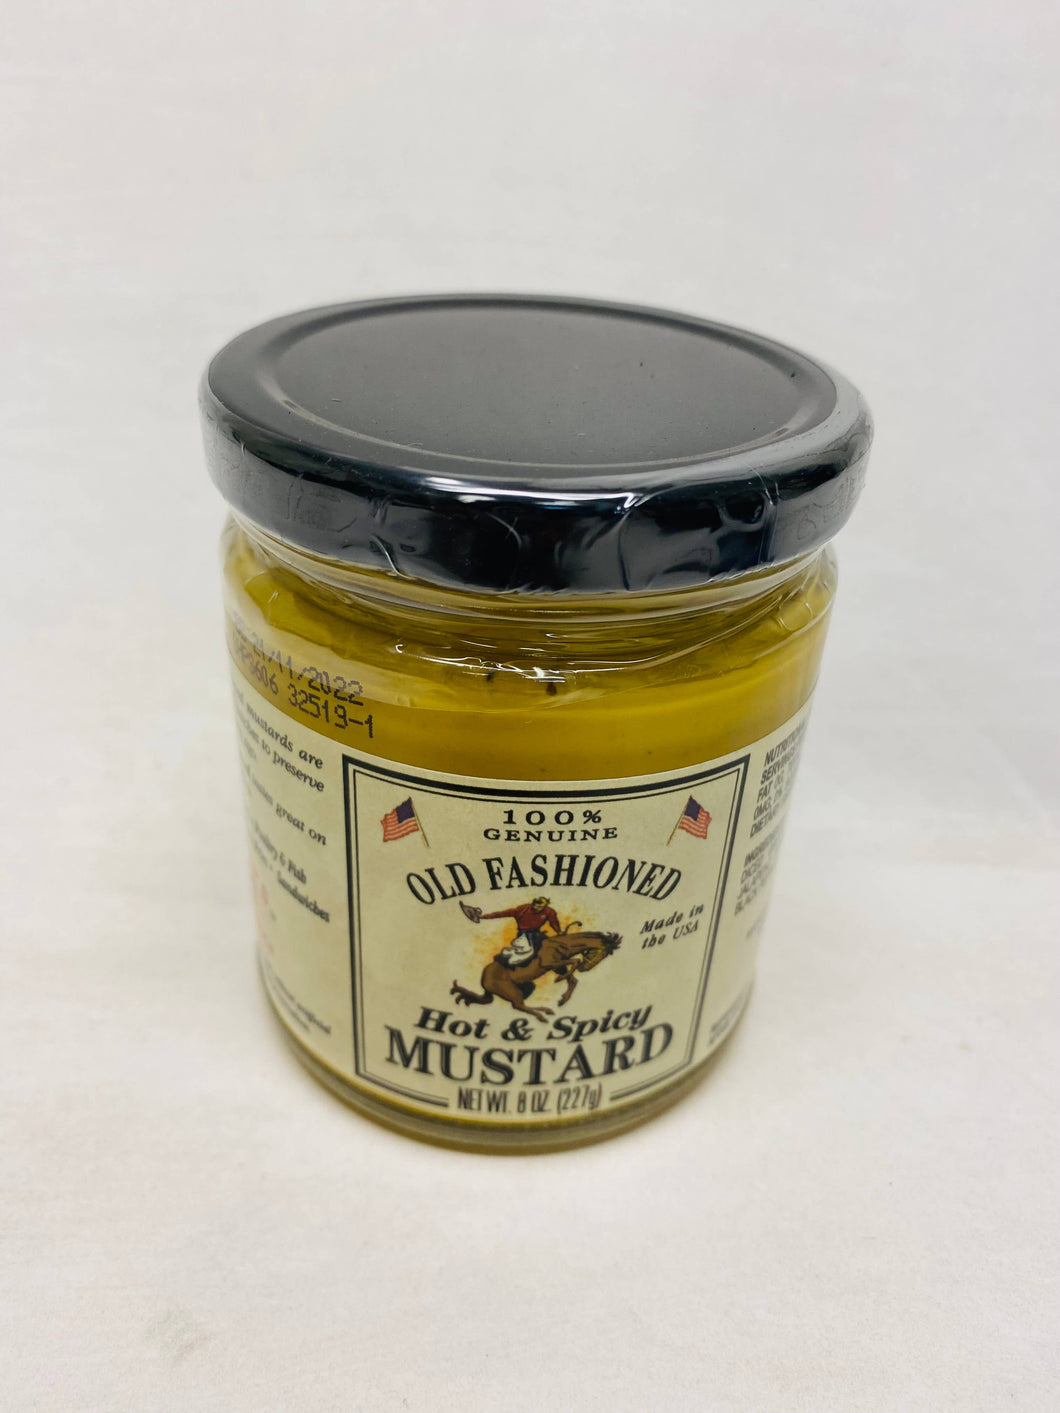 Shemps Old Fashioned Hot & Spicy Mustard - 8 oz.